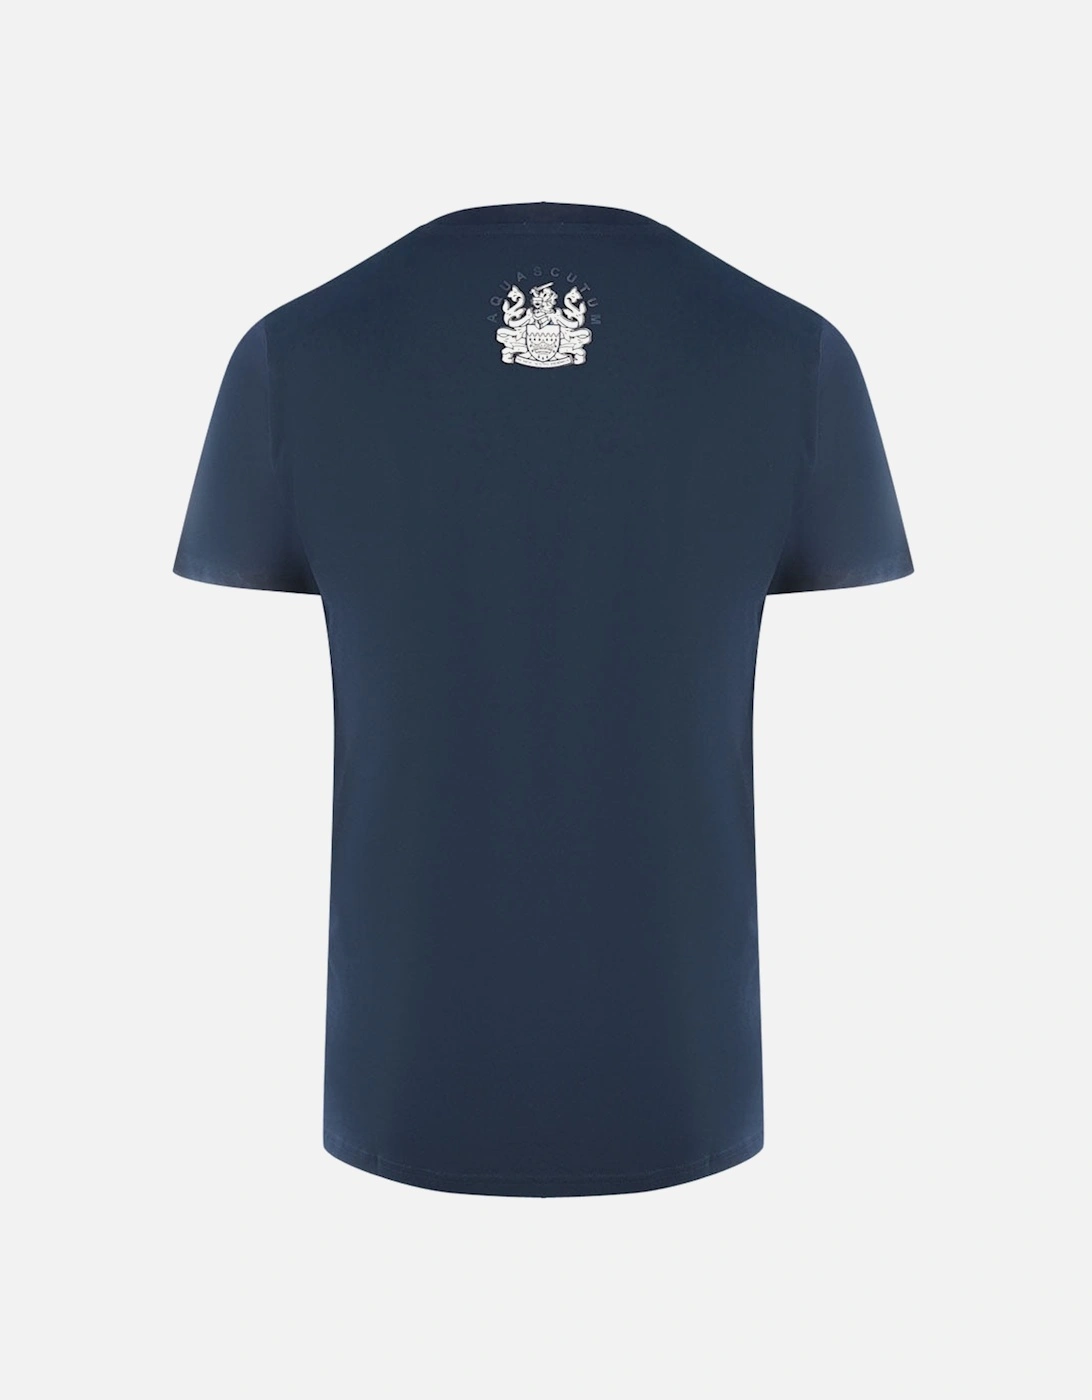 London Embroidered A Logo Navy Blue T-Shirt